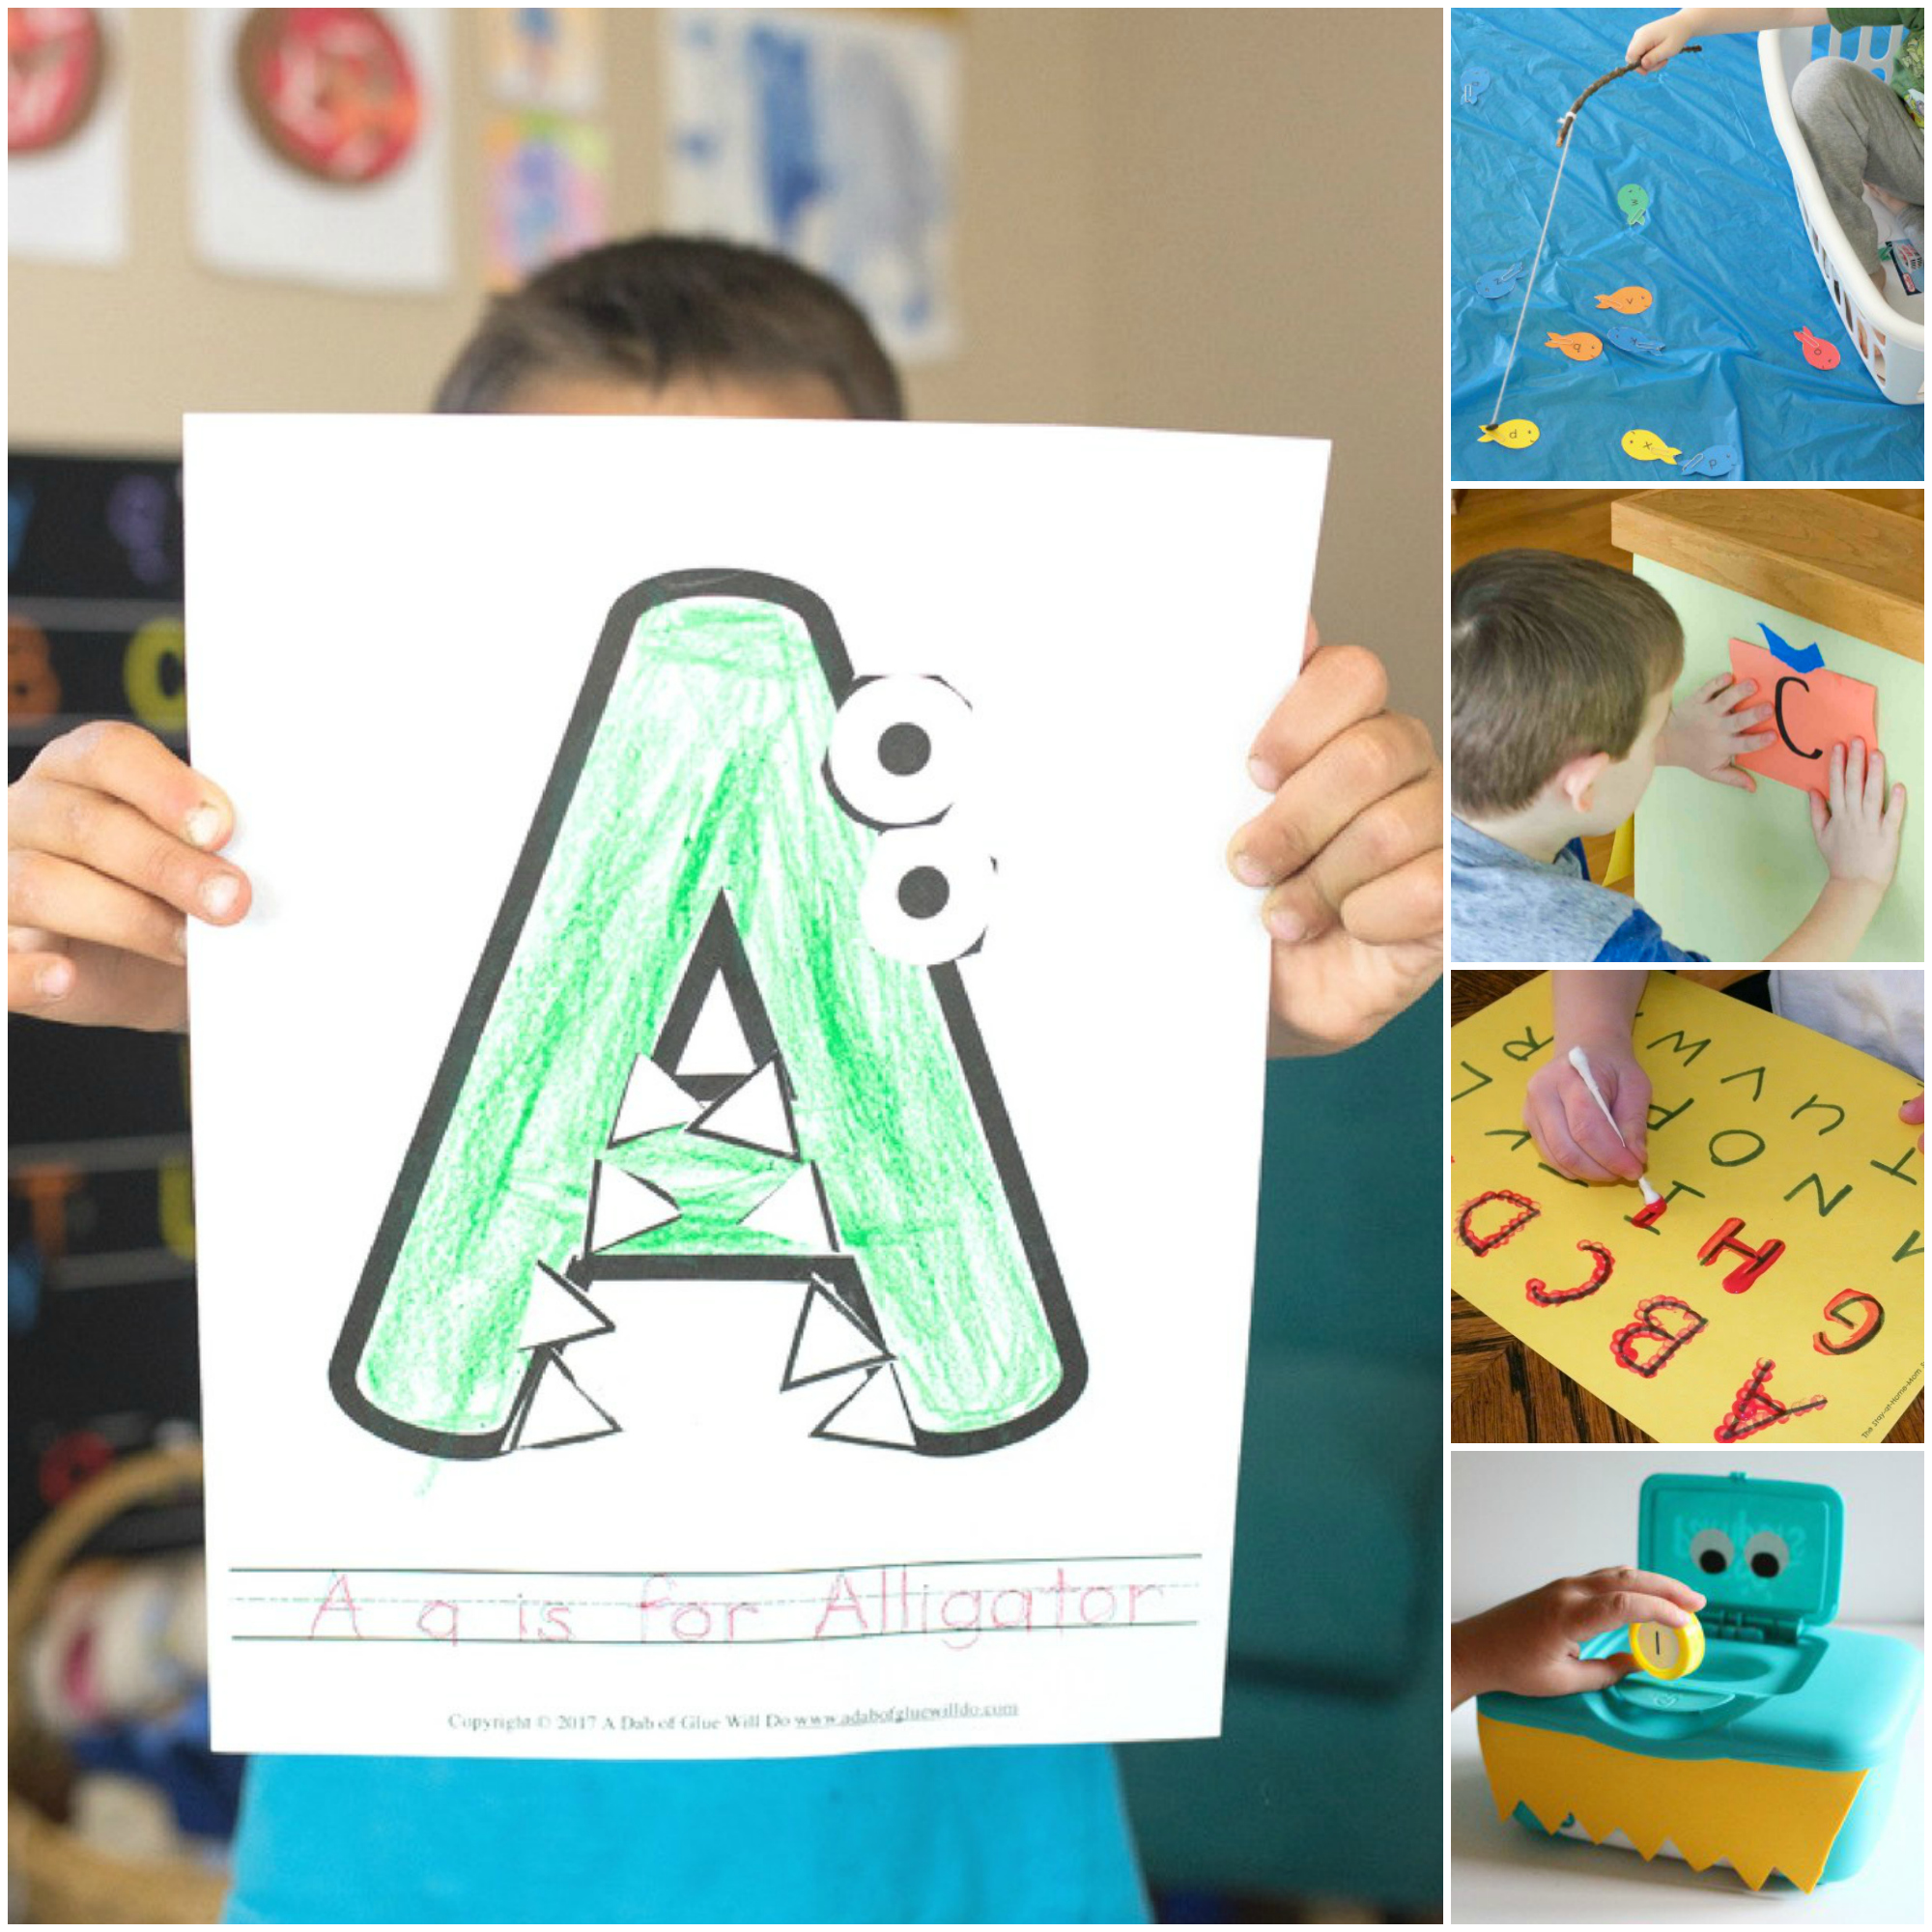 The alphabet is one of my favorite things to teach little learners! When you can make learning hands-on kids LOVE it and learning really sticks with the kids. Here's a set of some of my favorite hands-on alphabet learning for little learners!